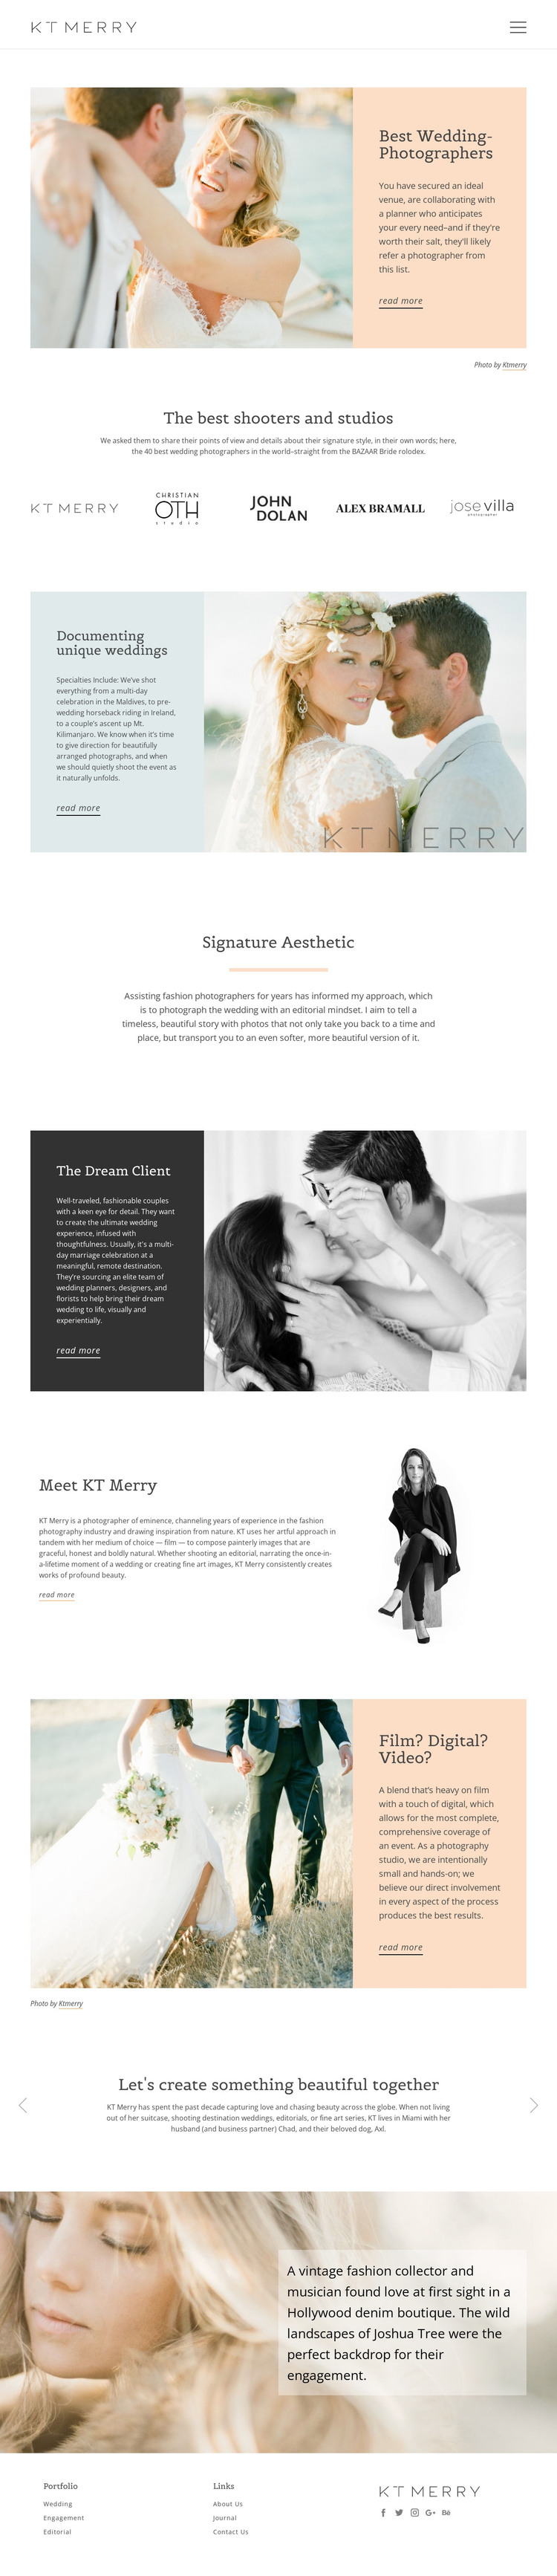 Shooters for special wedding WordPress Theme